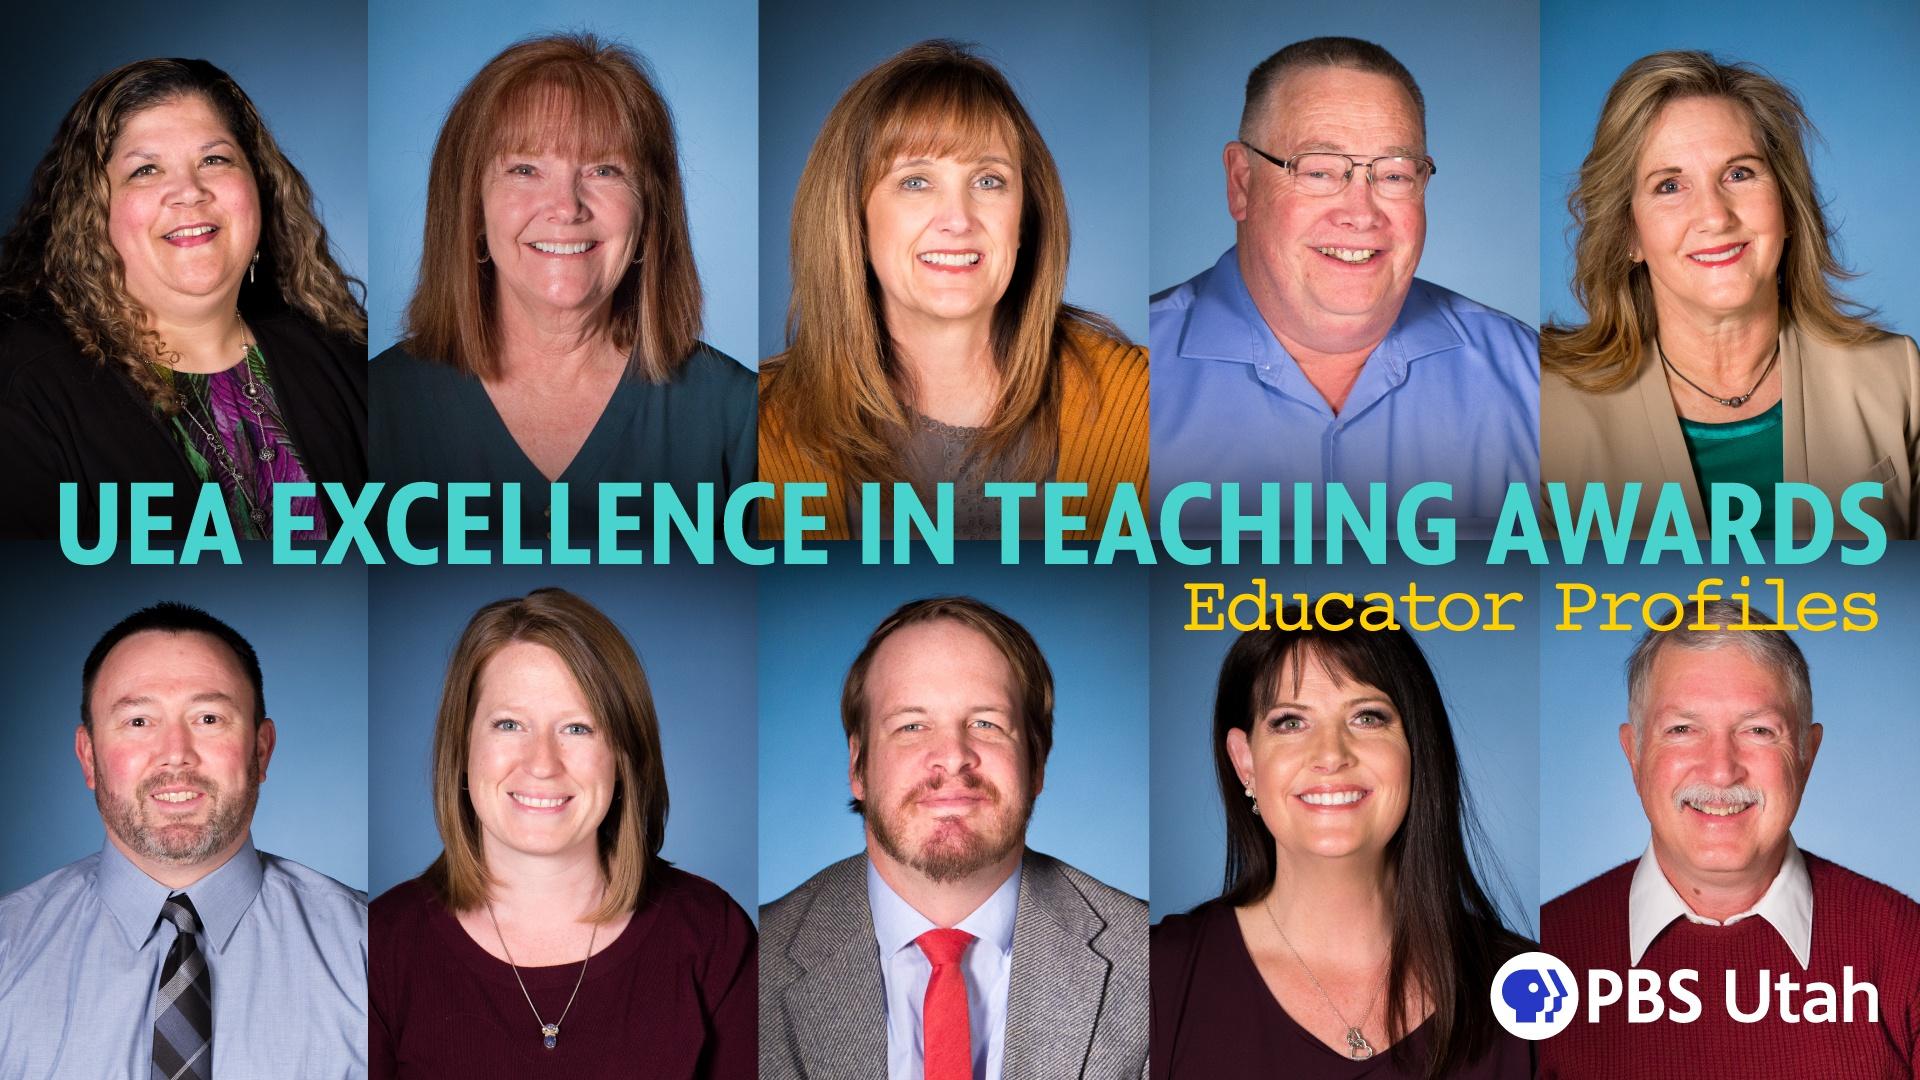 UEA Excellence in Teaching Awards - Educator Profiles 2020